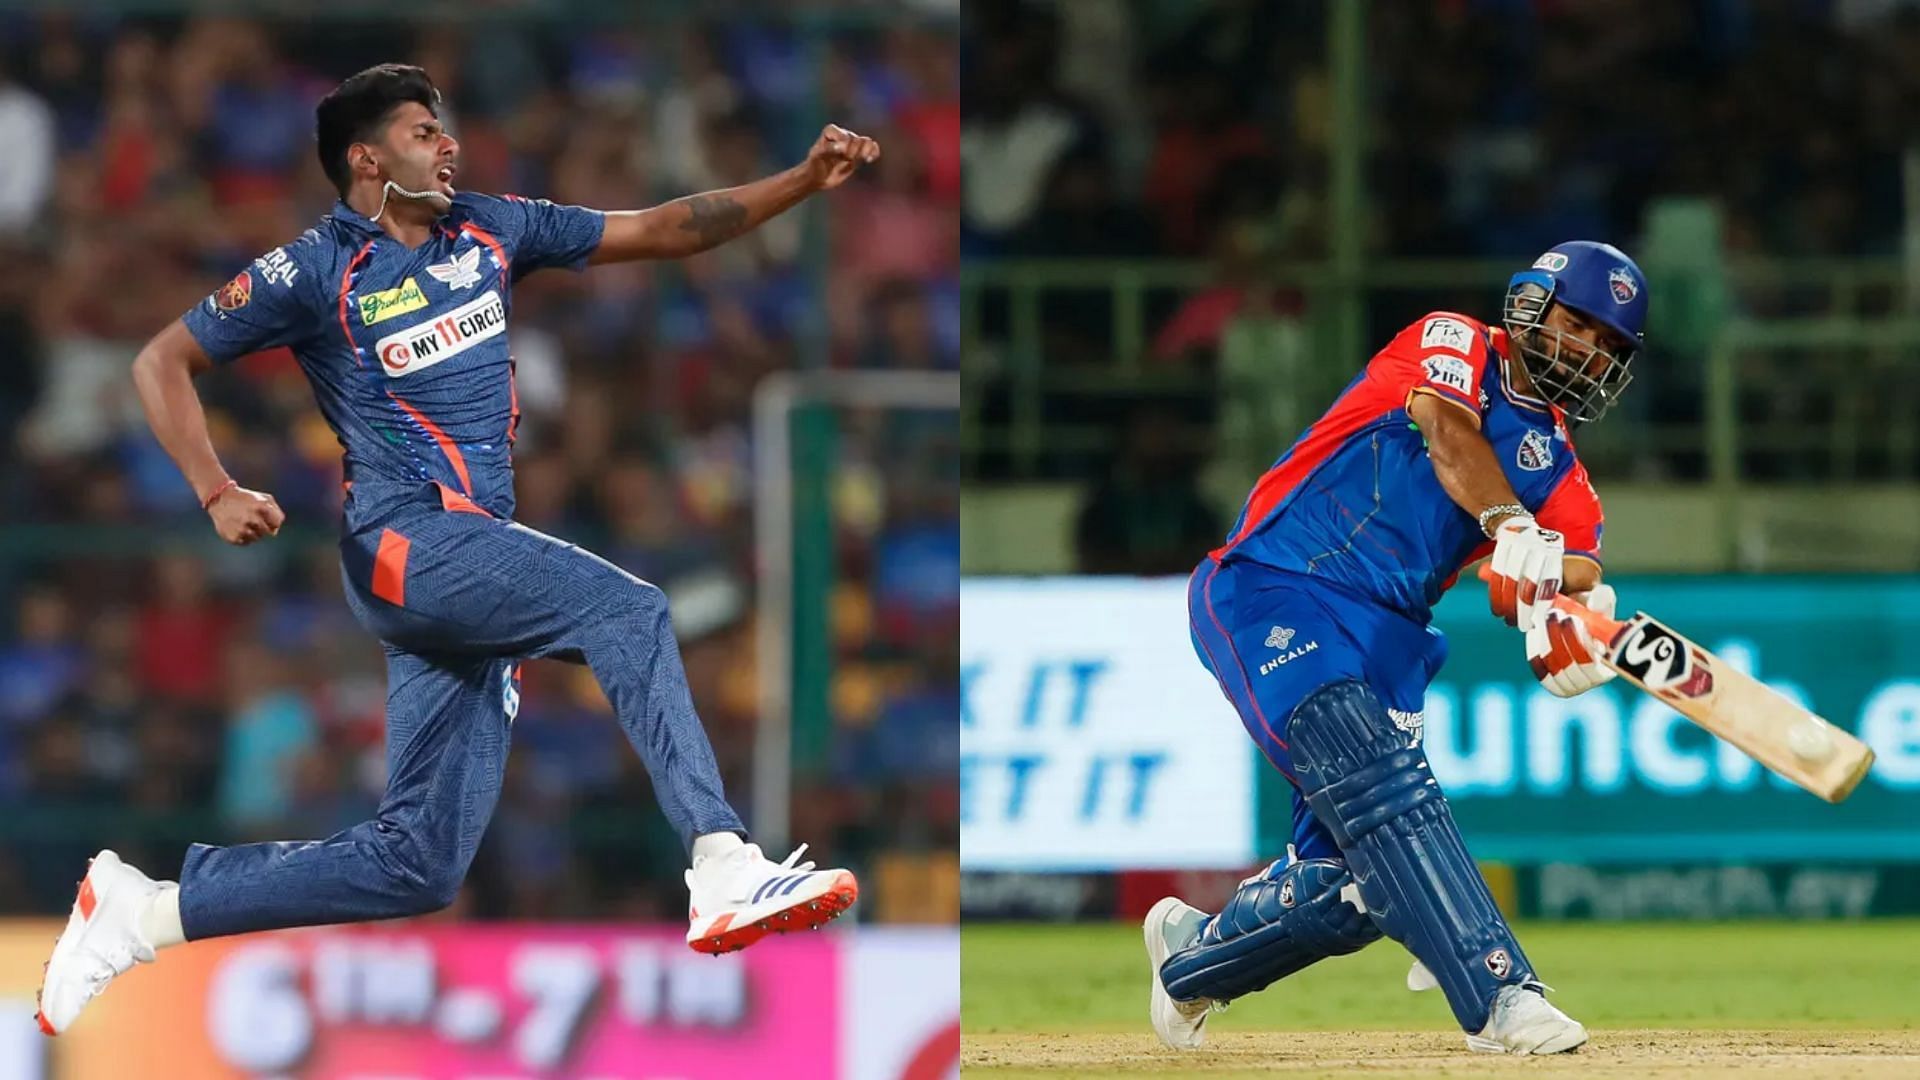 Mayank Yadav picked up 3 wickets in consecutive games while Rishabh Pant scored back-to-back half-centuries (Image: IPL)